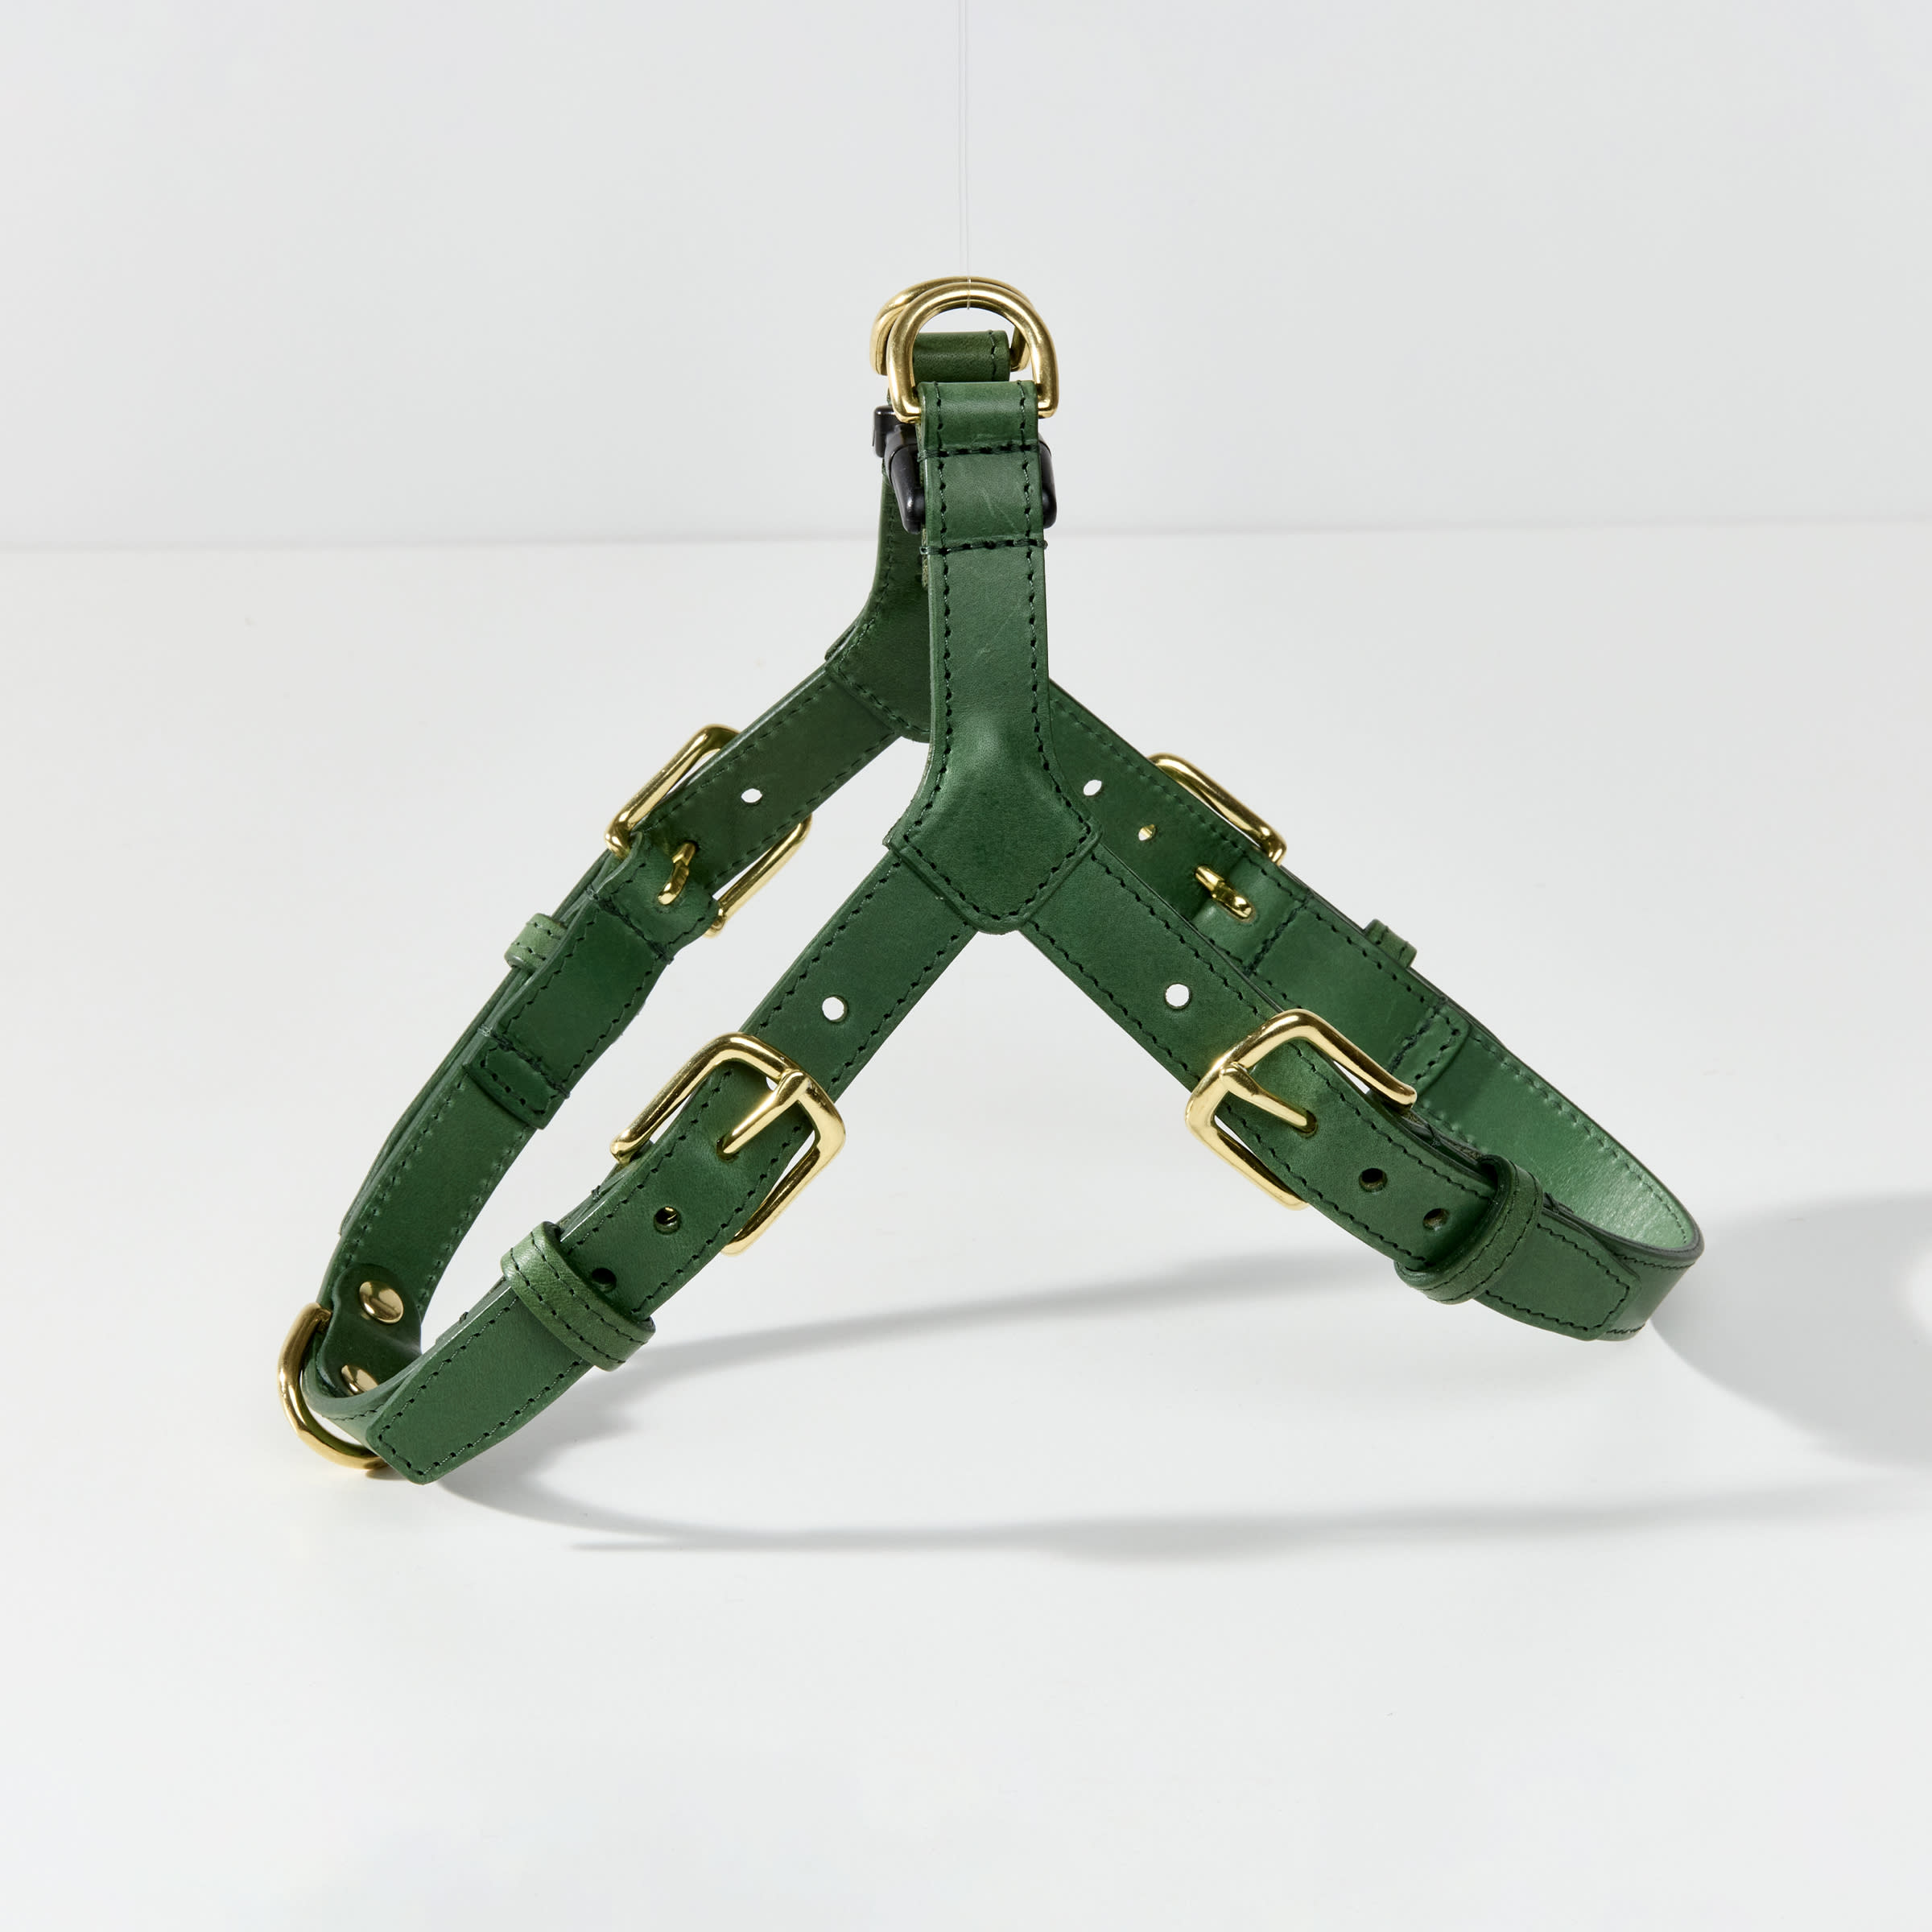 One-click Leather Dog Harness in Green